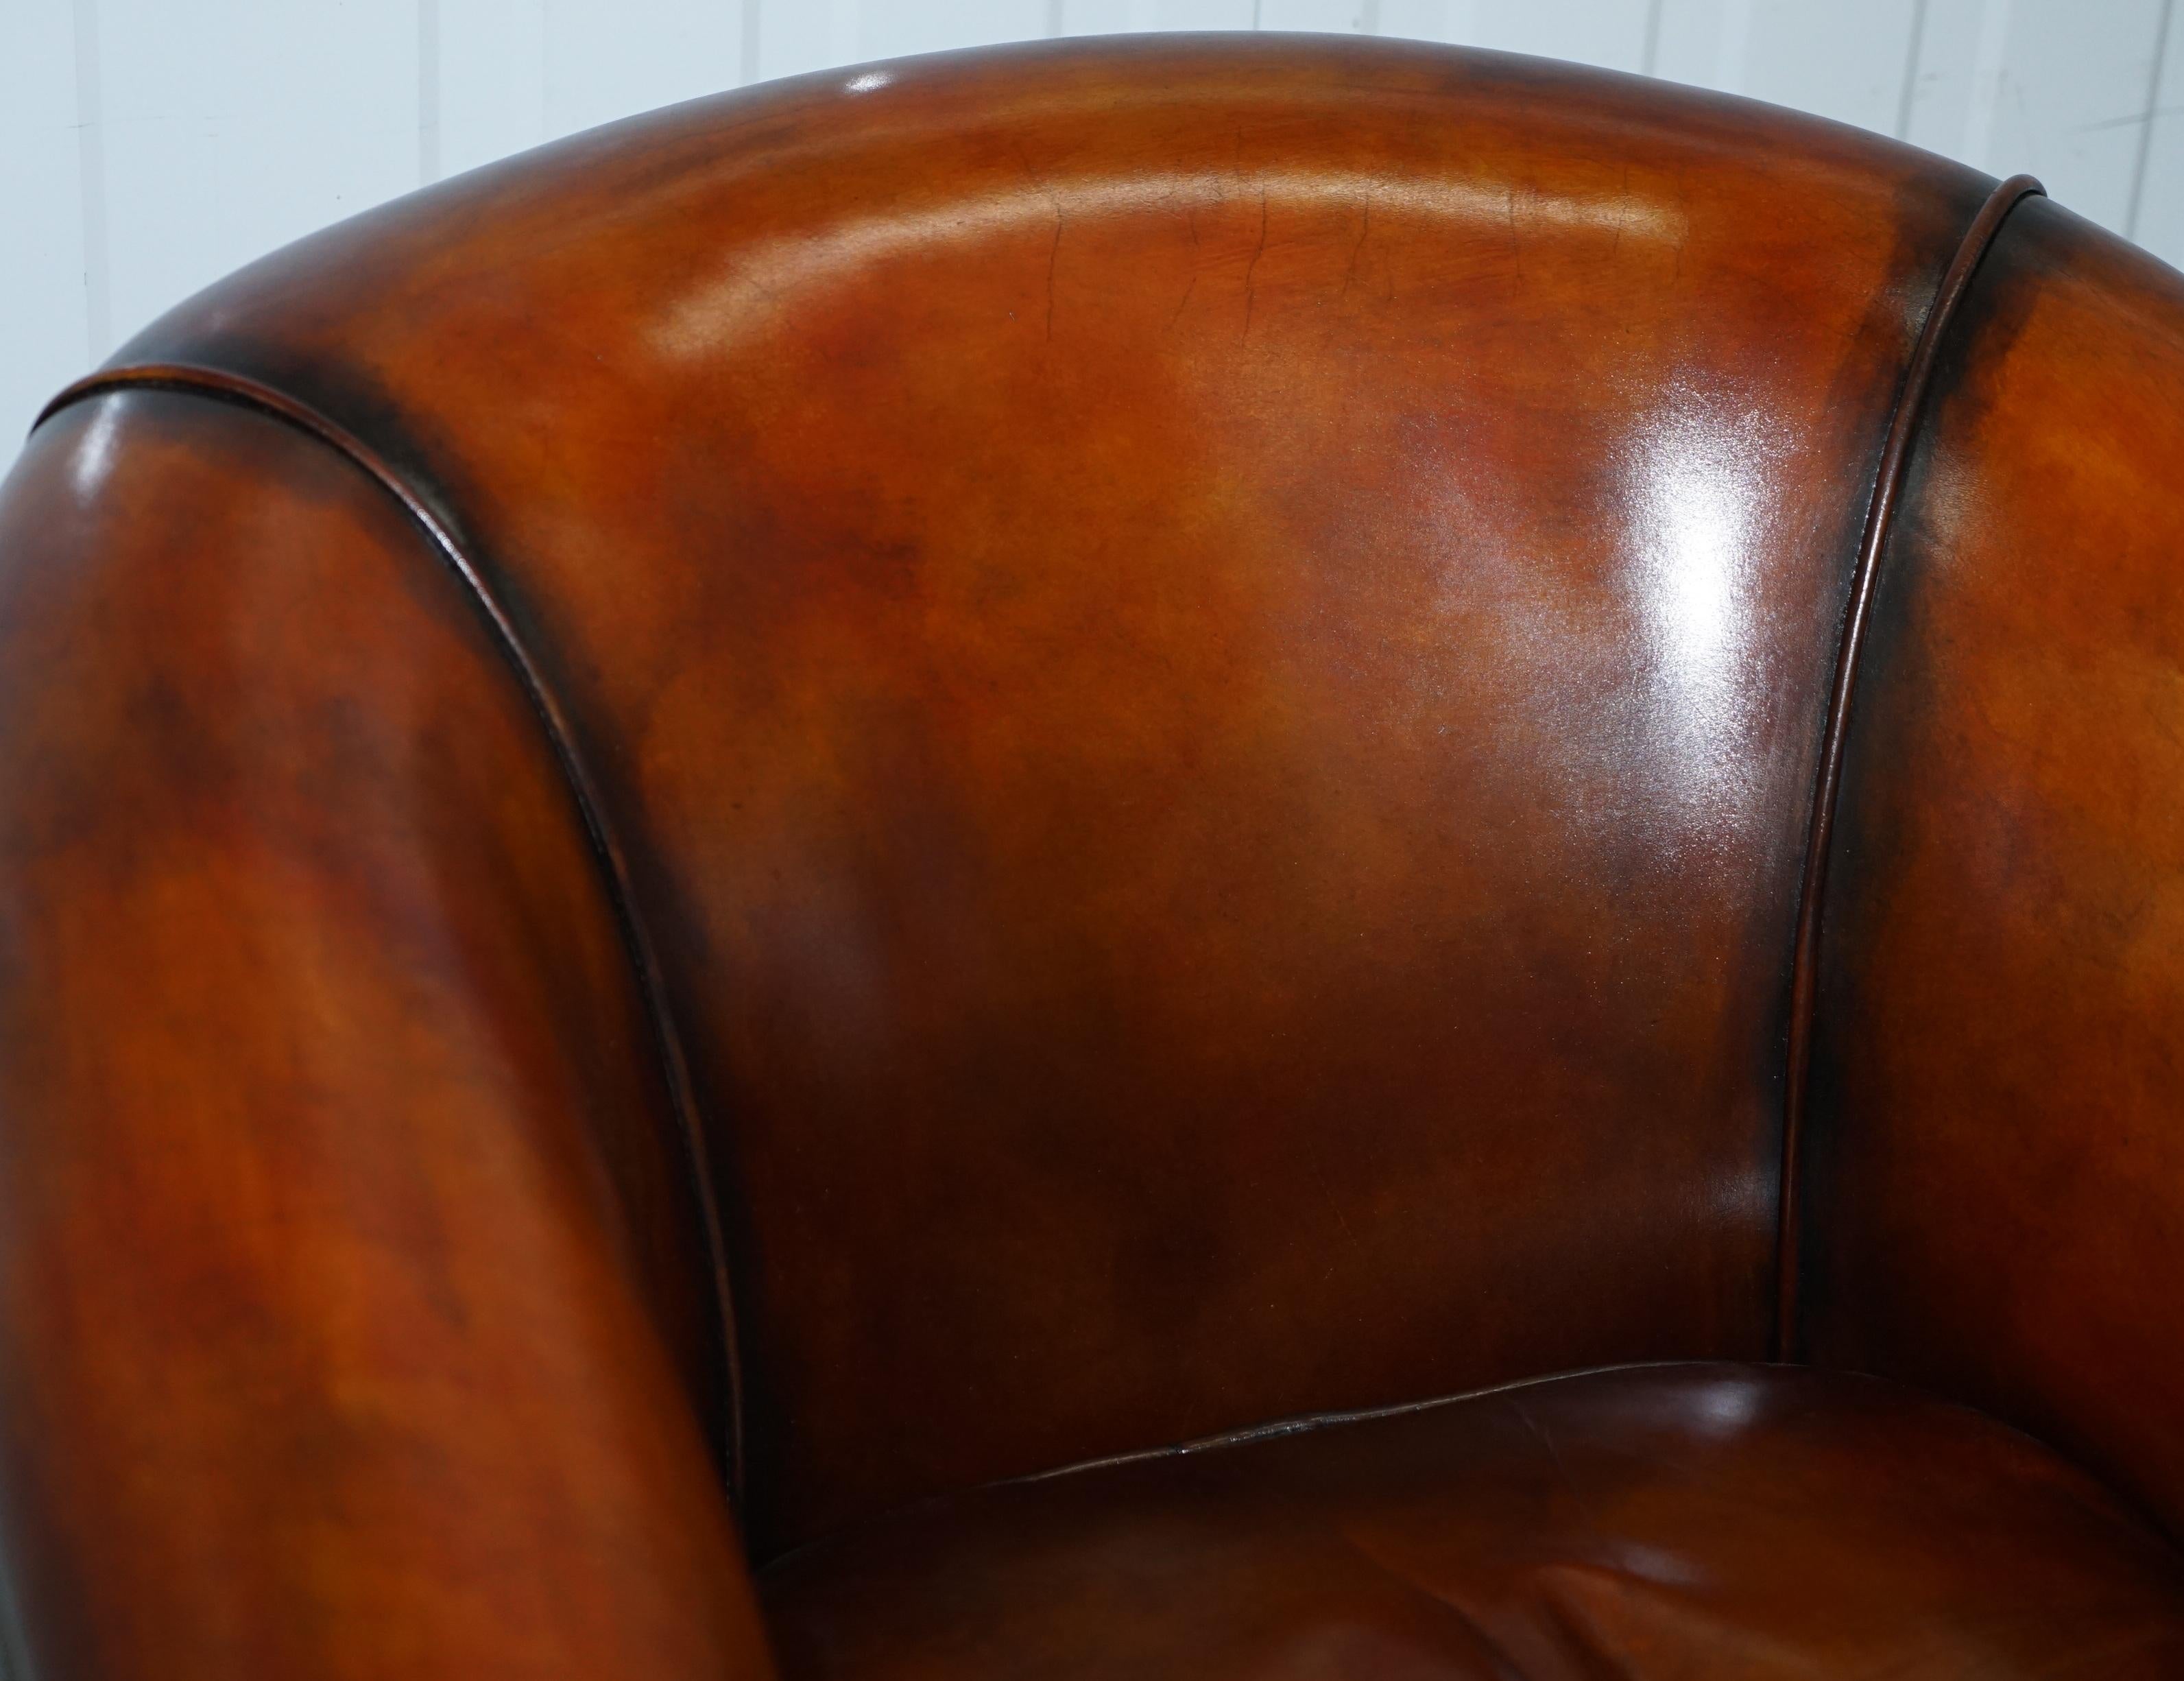 Hand-Crafted James Bond 007 Armchair from Spectre Leather Chairs of Bath Fully Restored